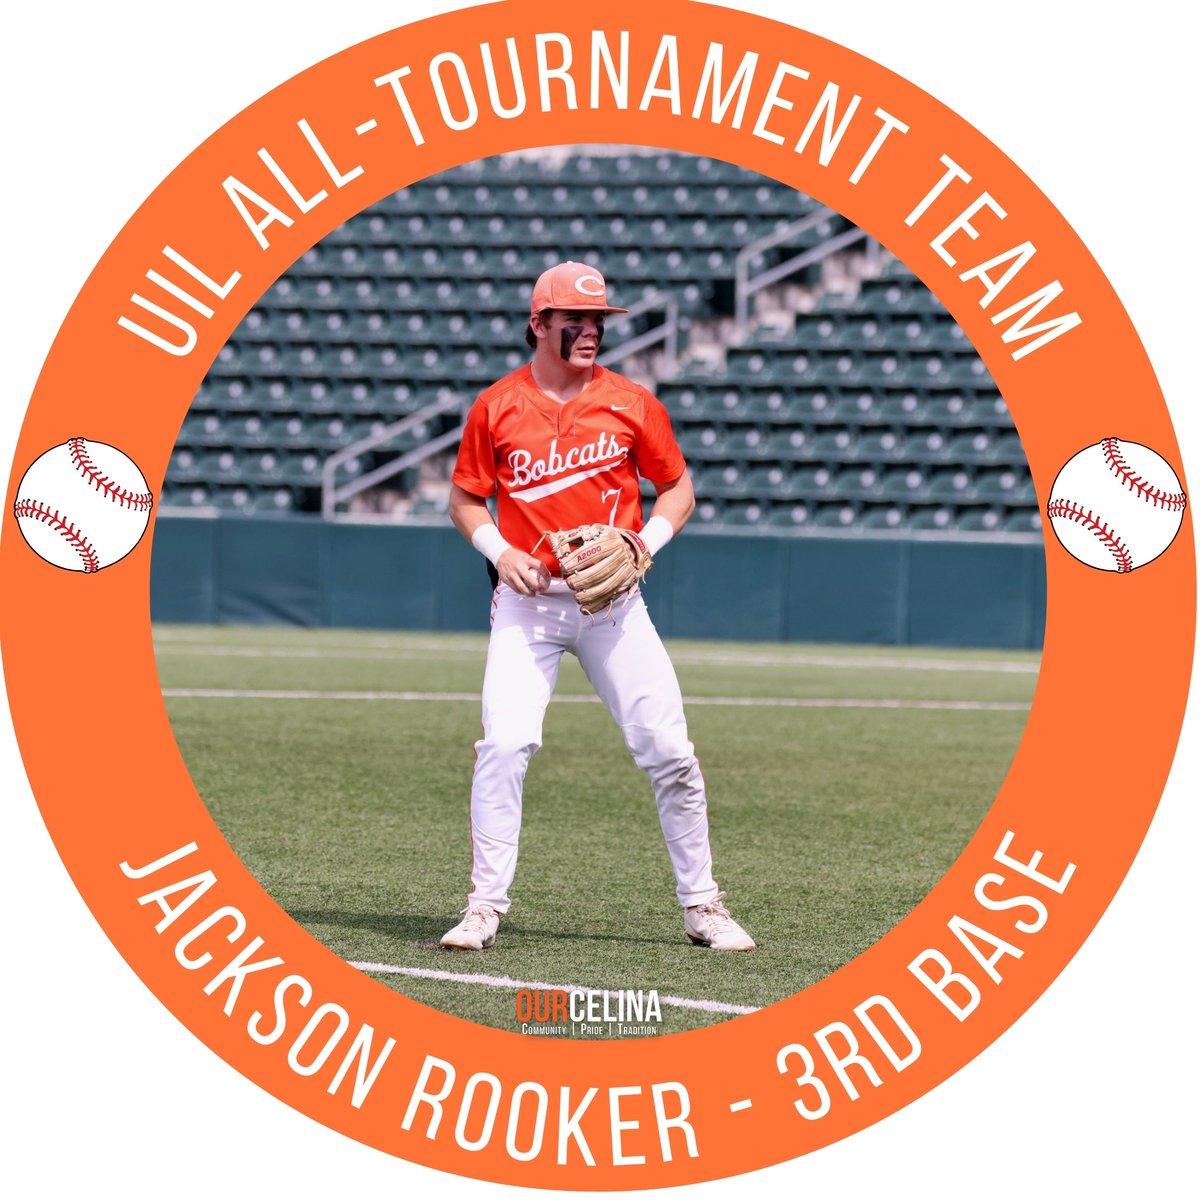 Congrats to @CBobcatBaseball 3rd Baseman @JacksonRooker , on being named to the 4A State Championship All-Tournament Team! (Selected by the Tx HS Baseball Coaches Association) @CelinaISD @TMcC27 @CHSbobcats @TMag29 @OurCelina